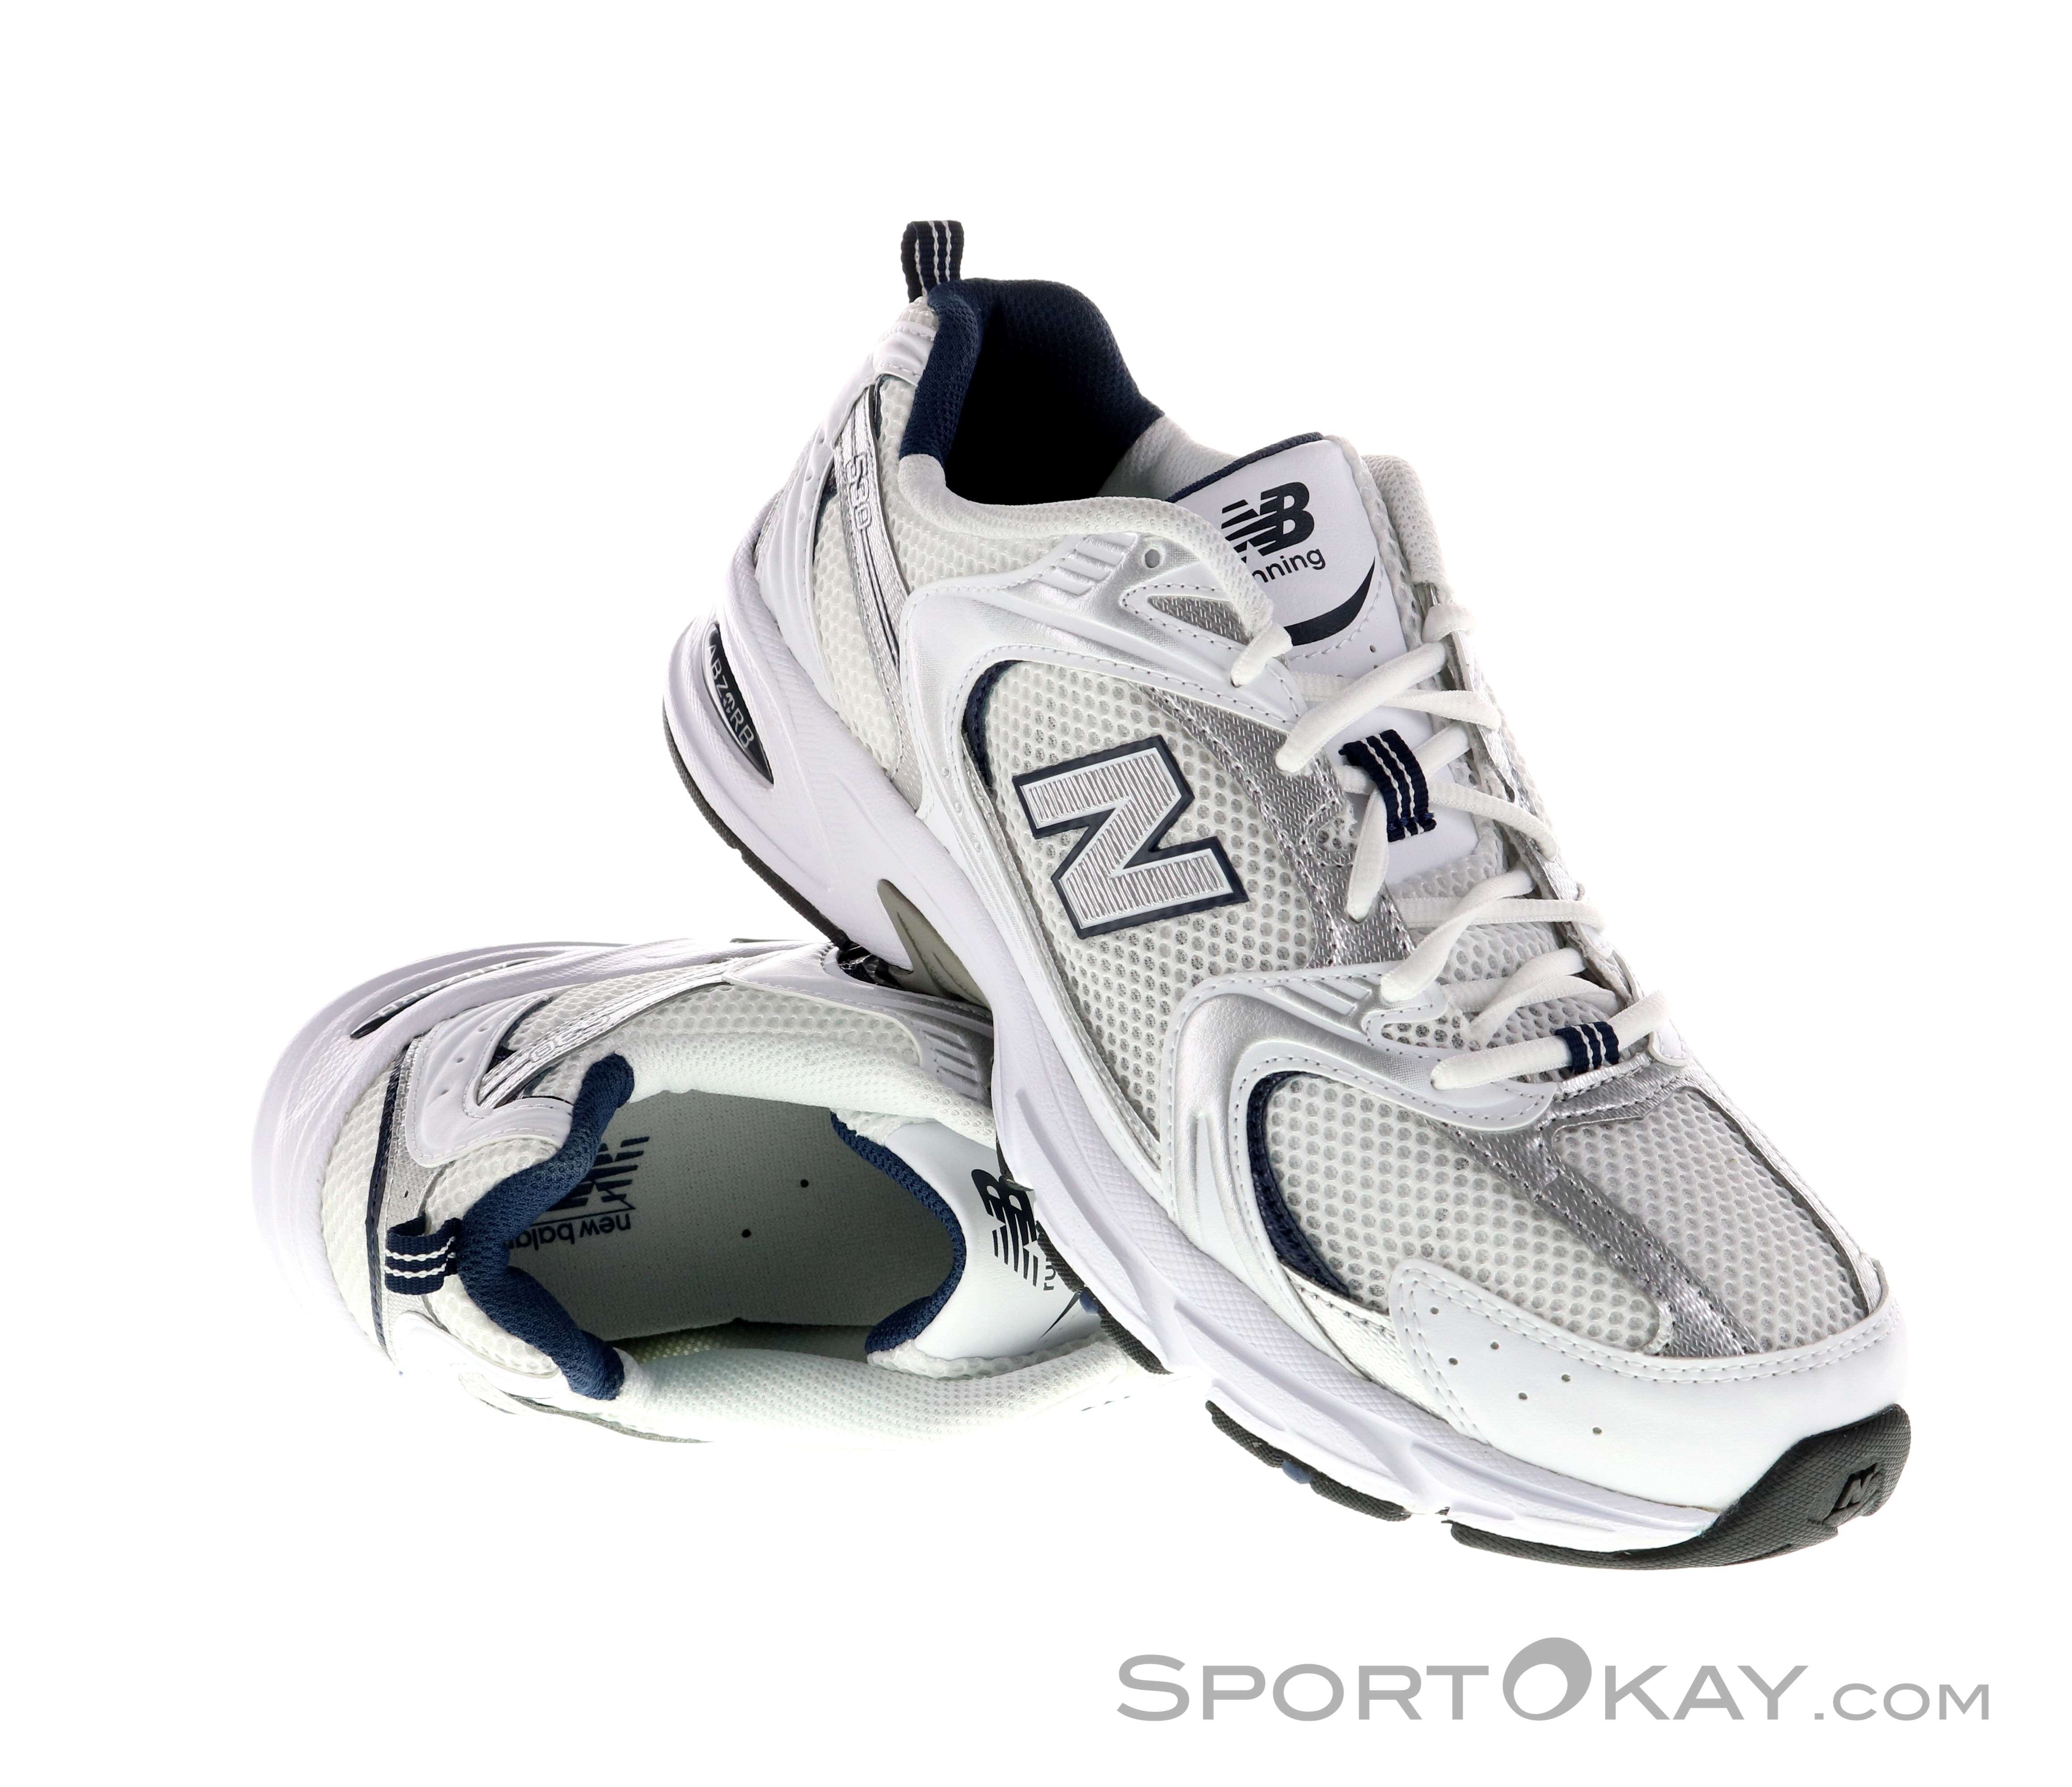 hélice Tropical Agresivo New Balance 2000s - Leisure Shoes - Shoes & Poles - Outdoor - All